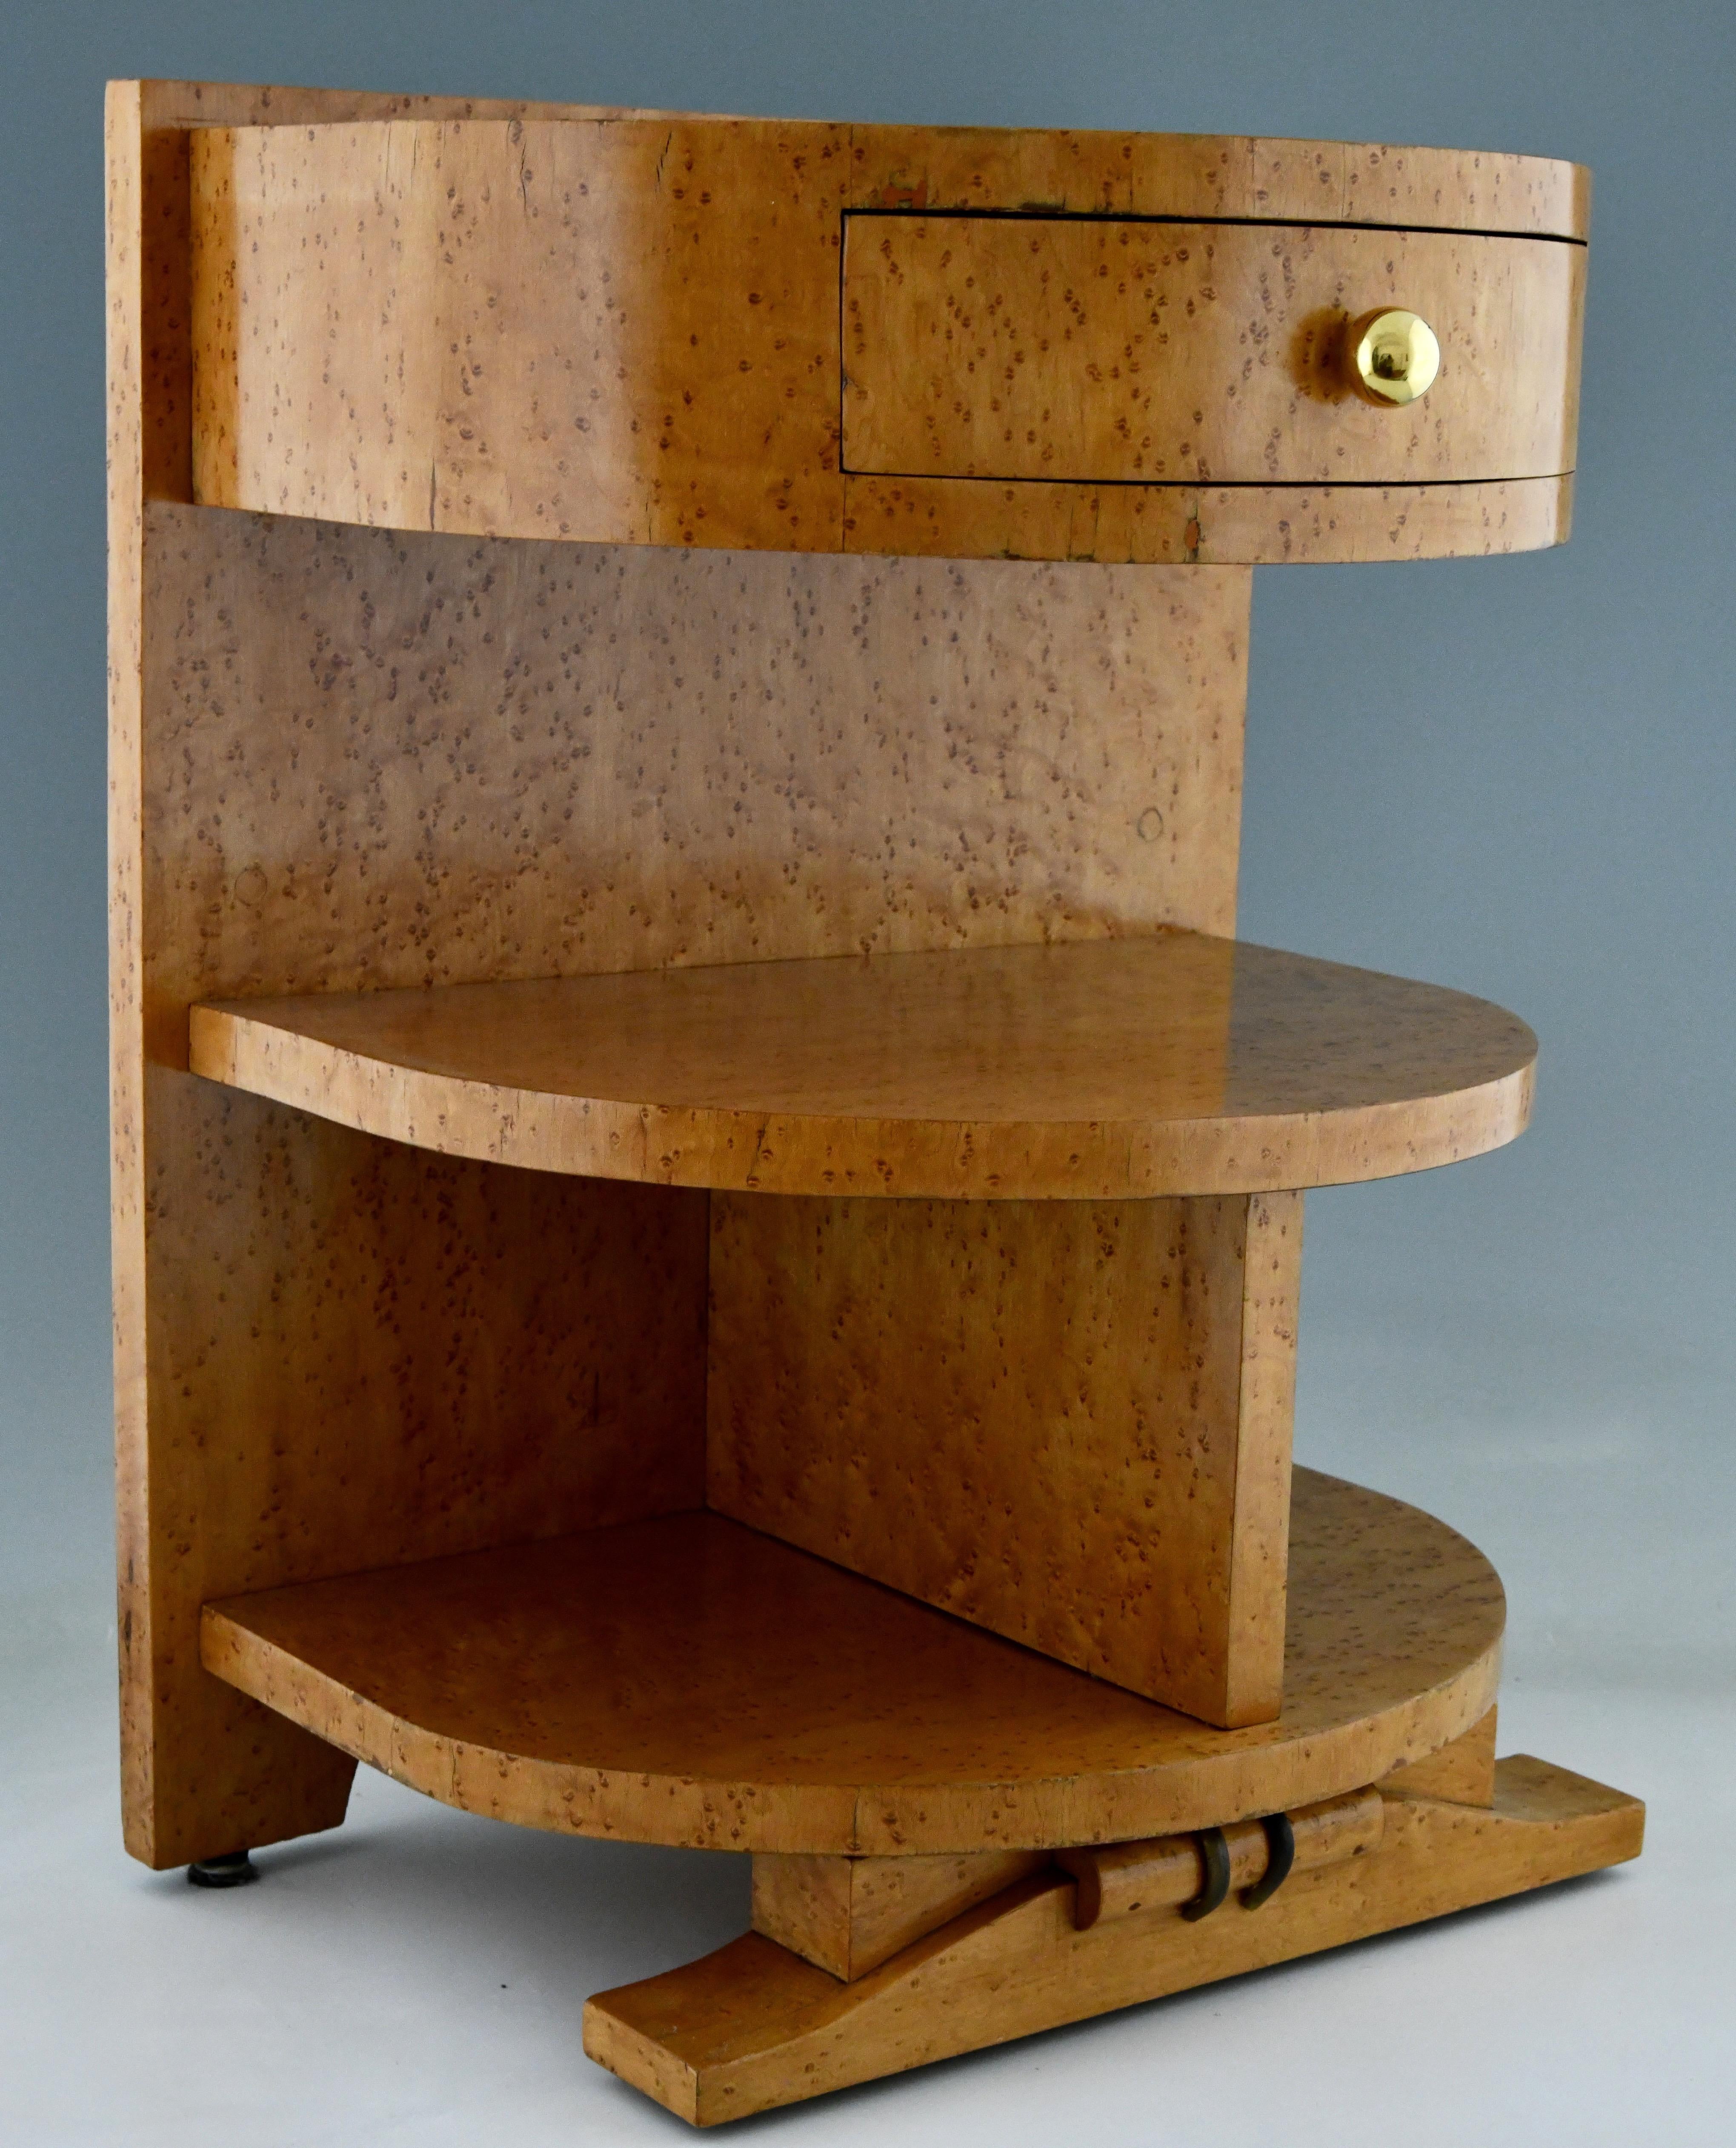 French Art Deco Pair of Semi Circle Bedside Tables Birdseye Maple Wood, France, 1930